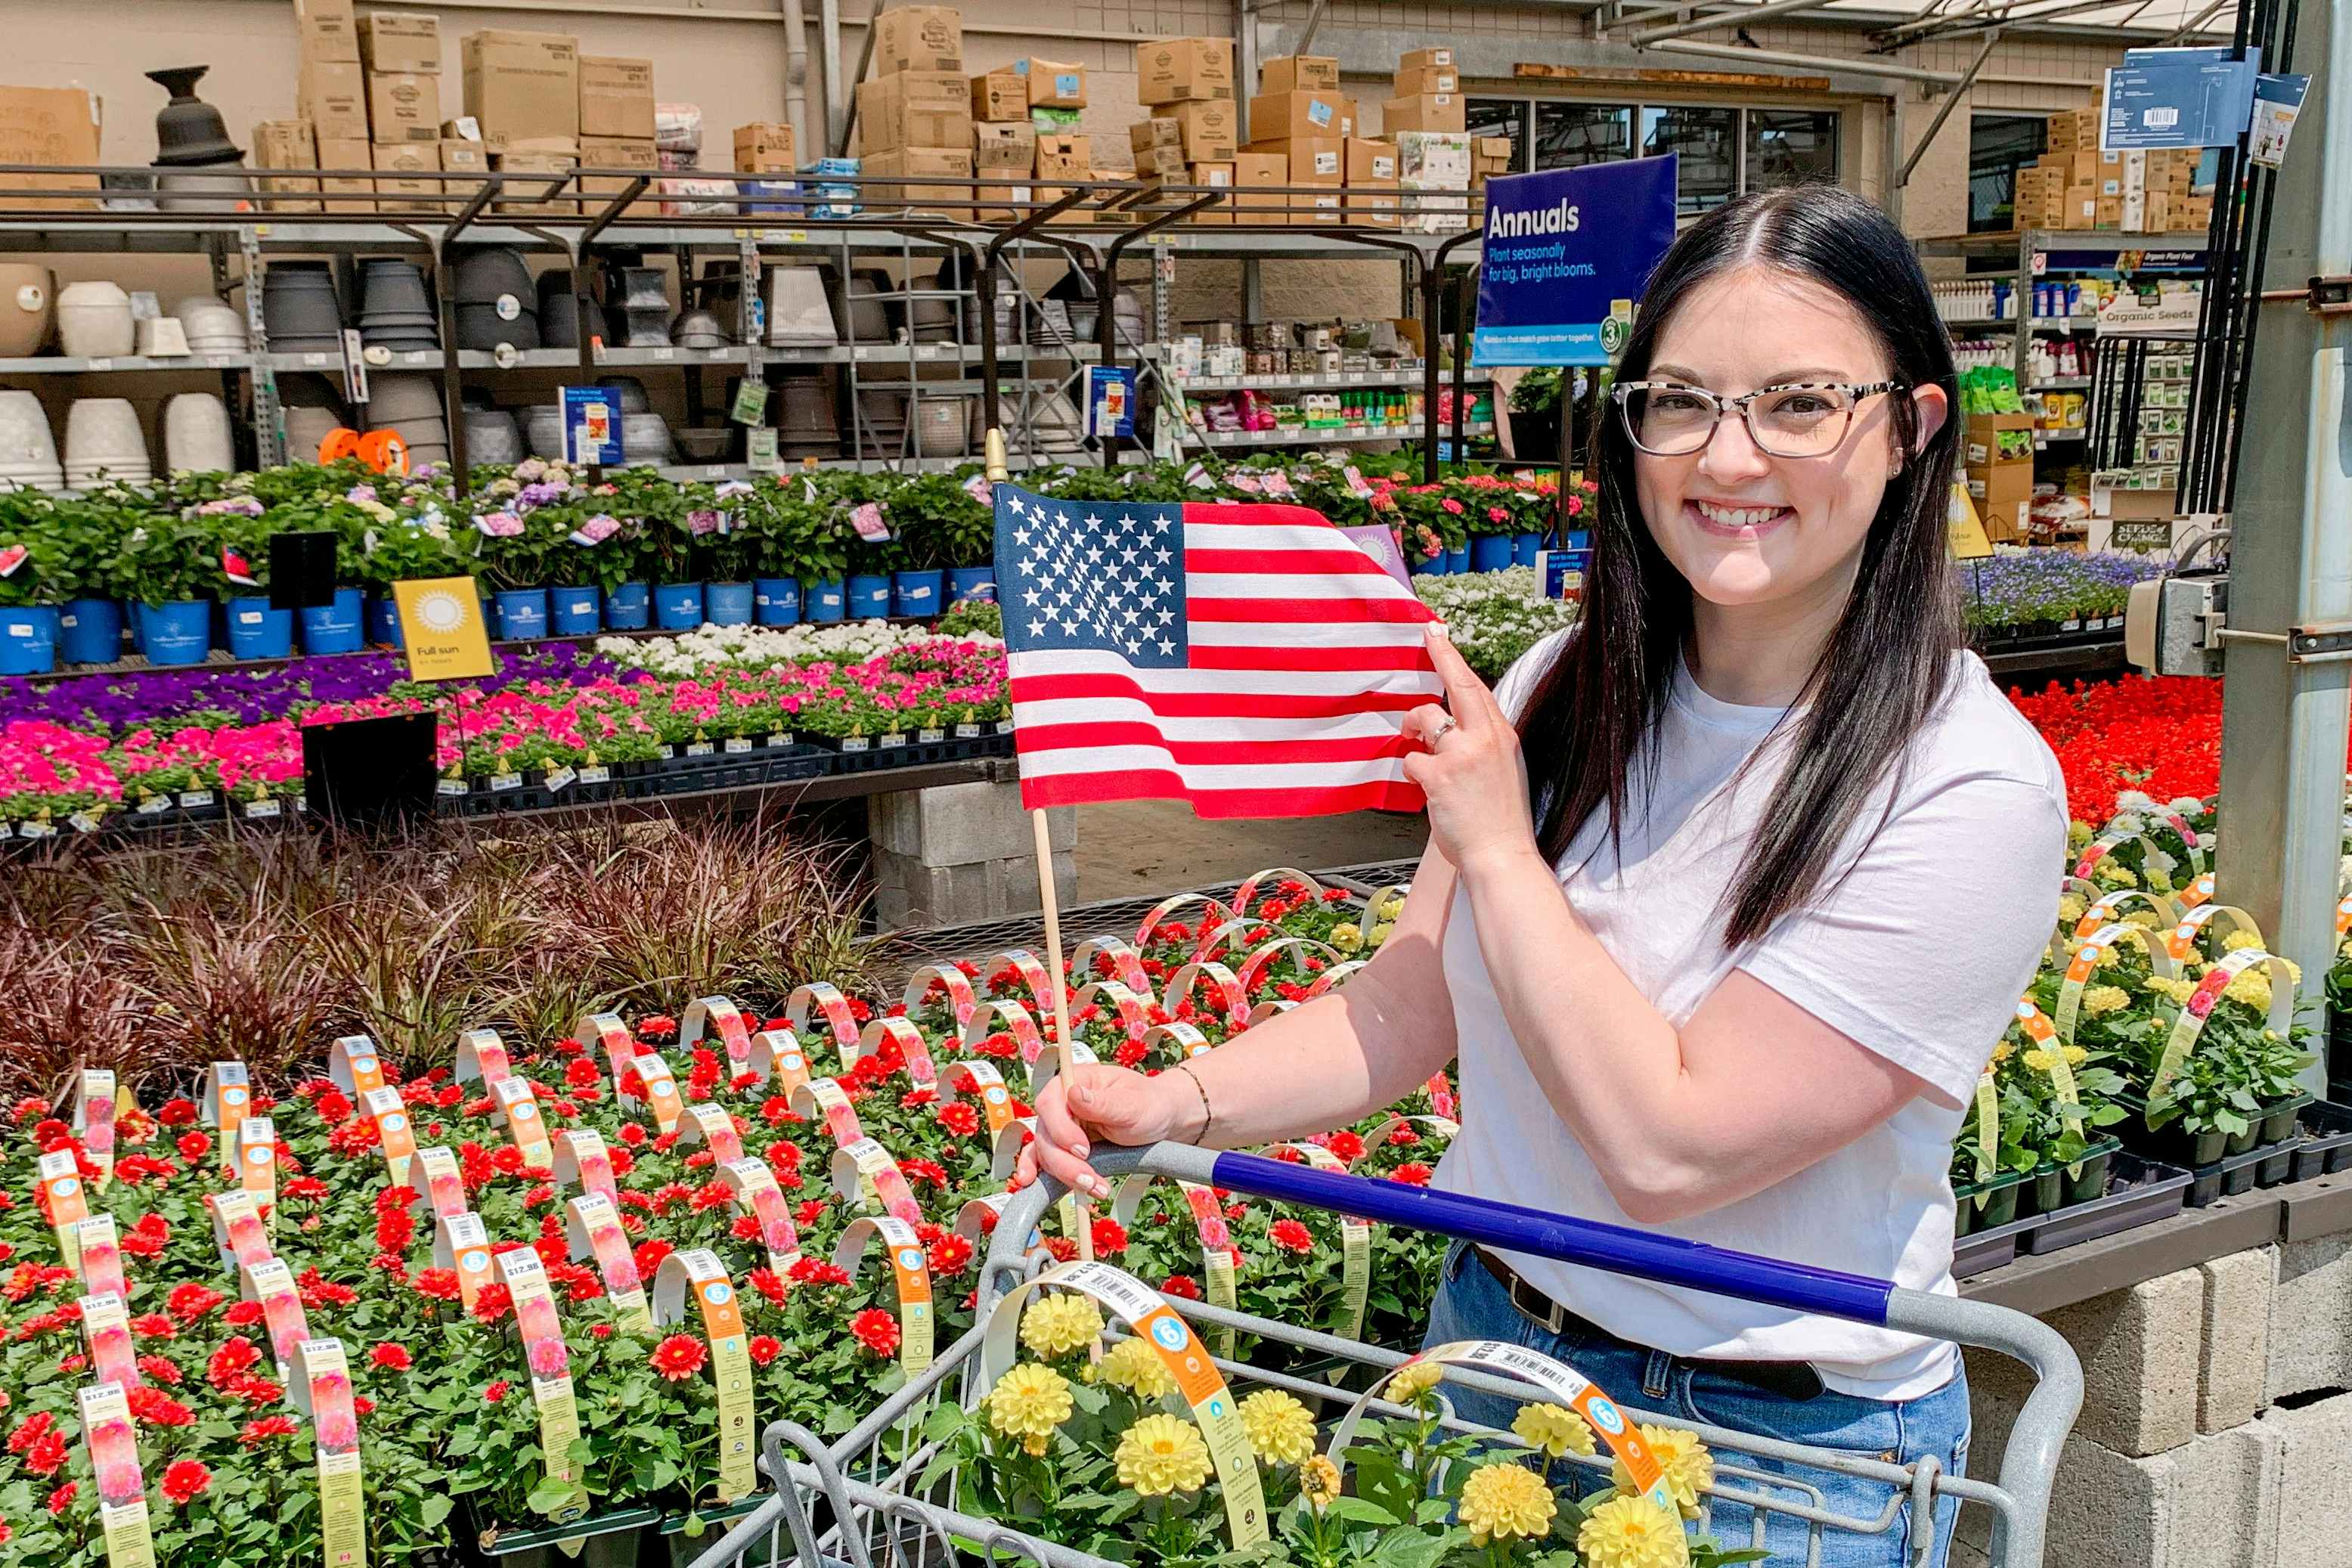 Lowes-memorial-day-sale-flag-flowers-model-kcl-feature-3x2